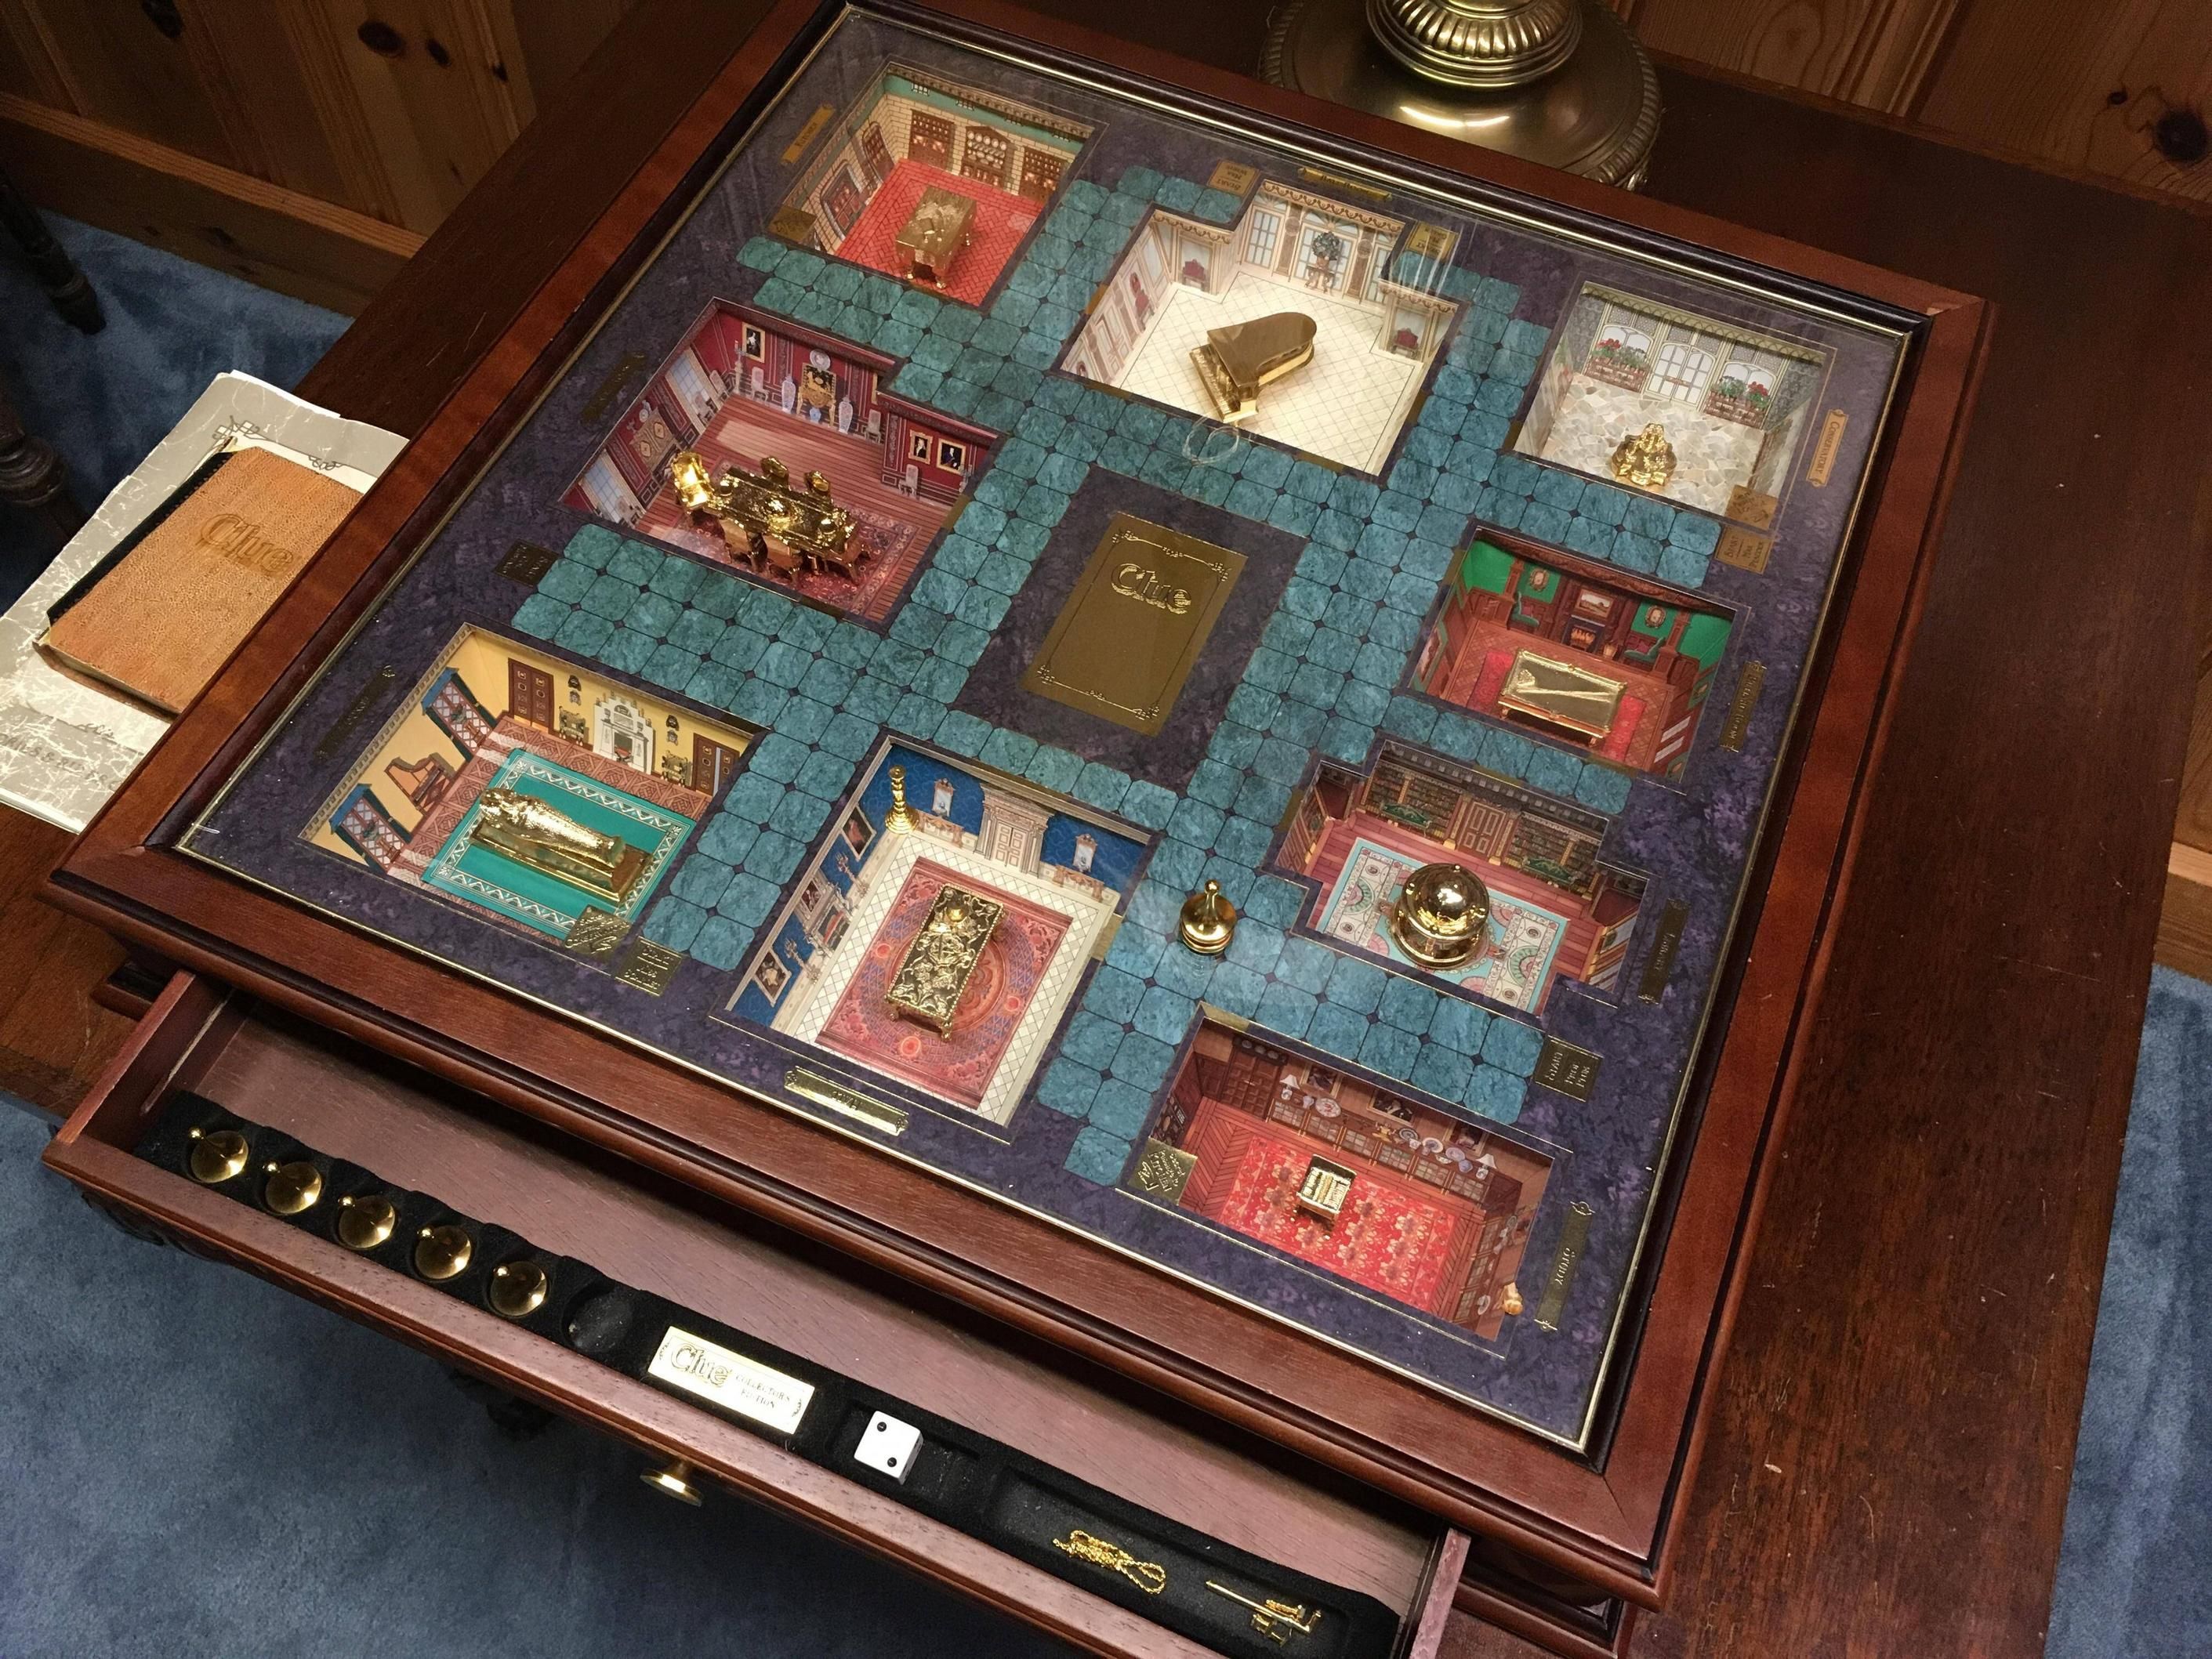 The B&B I stayed in had a 3D version of Clue